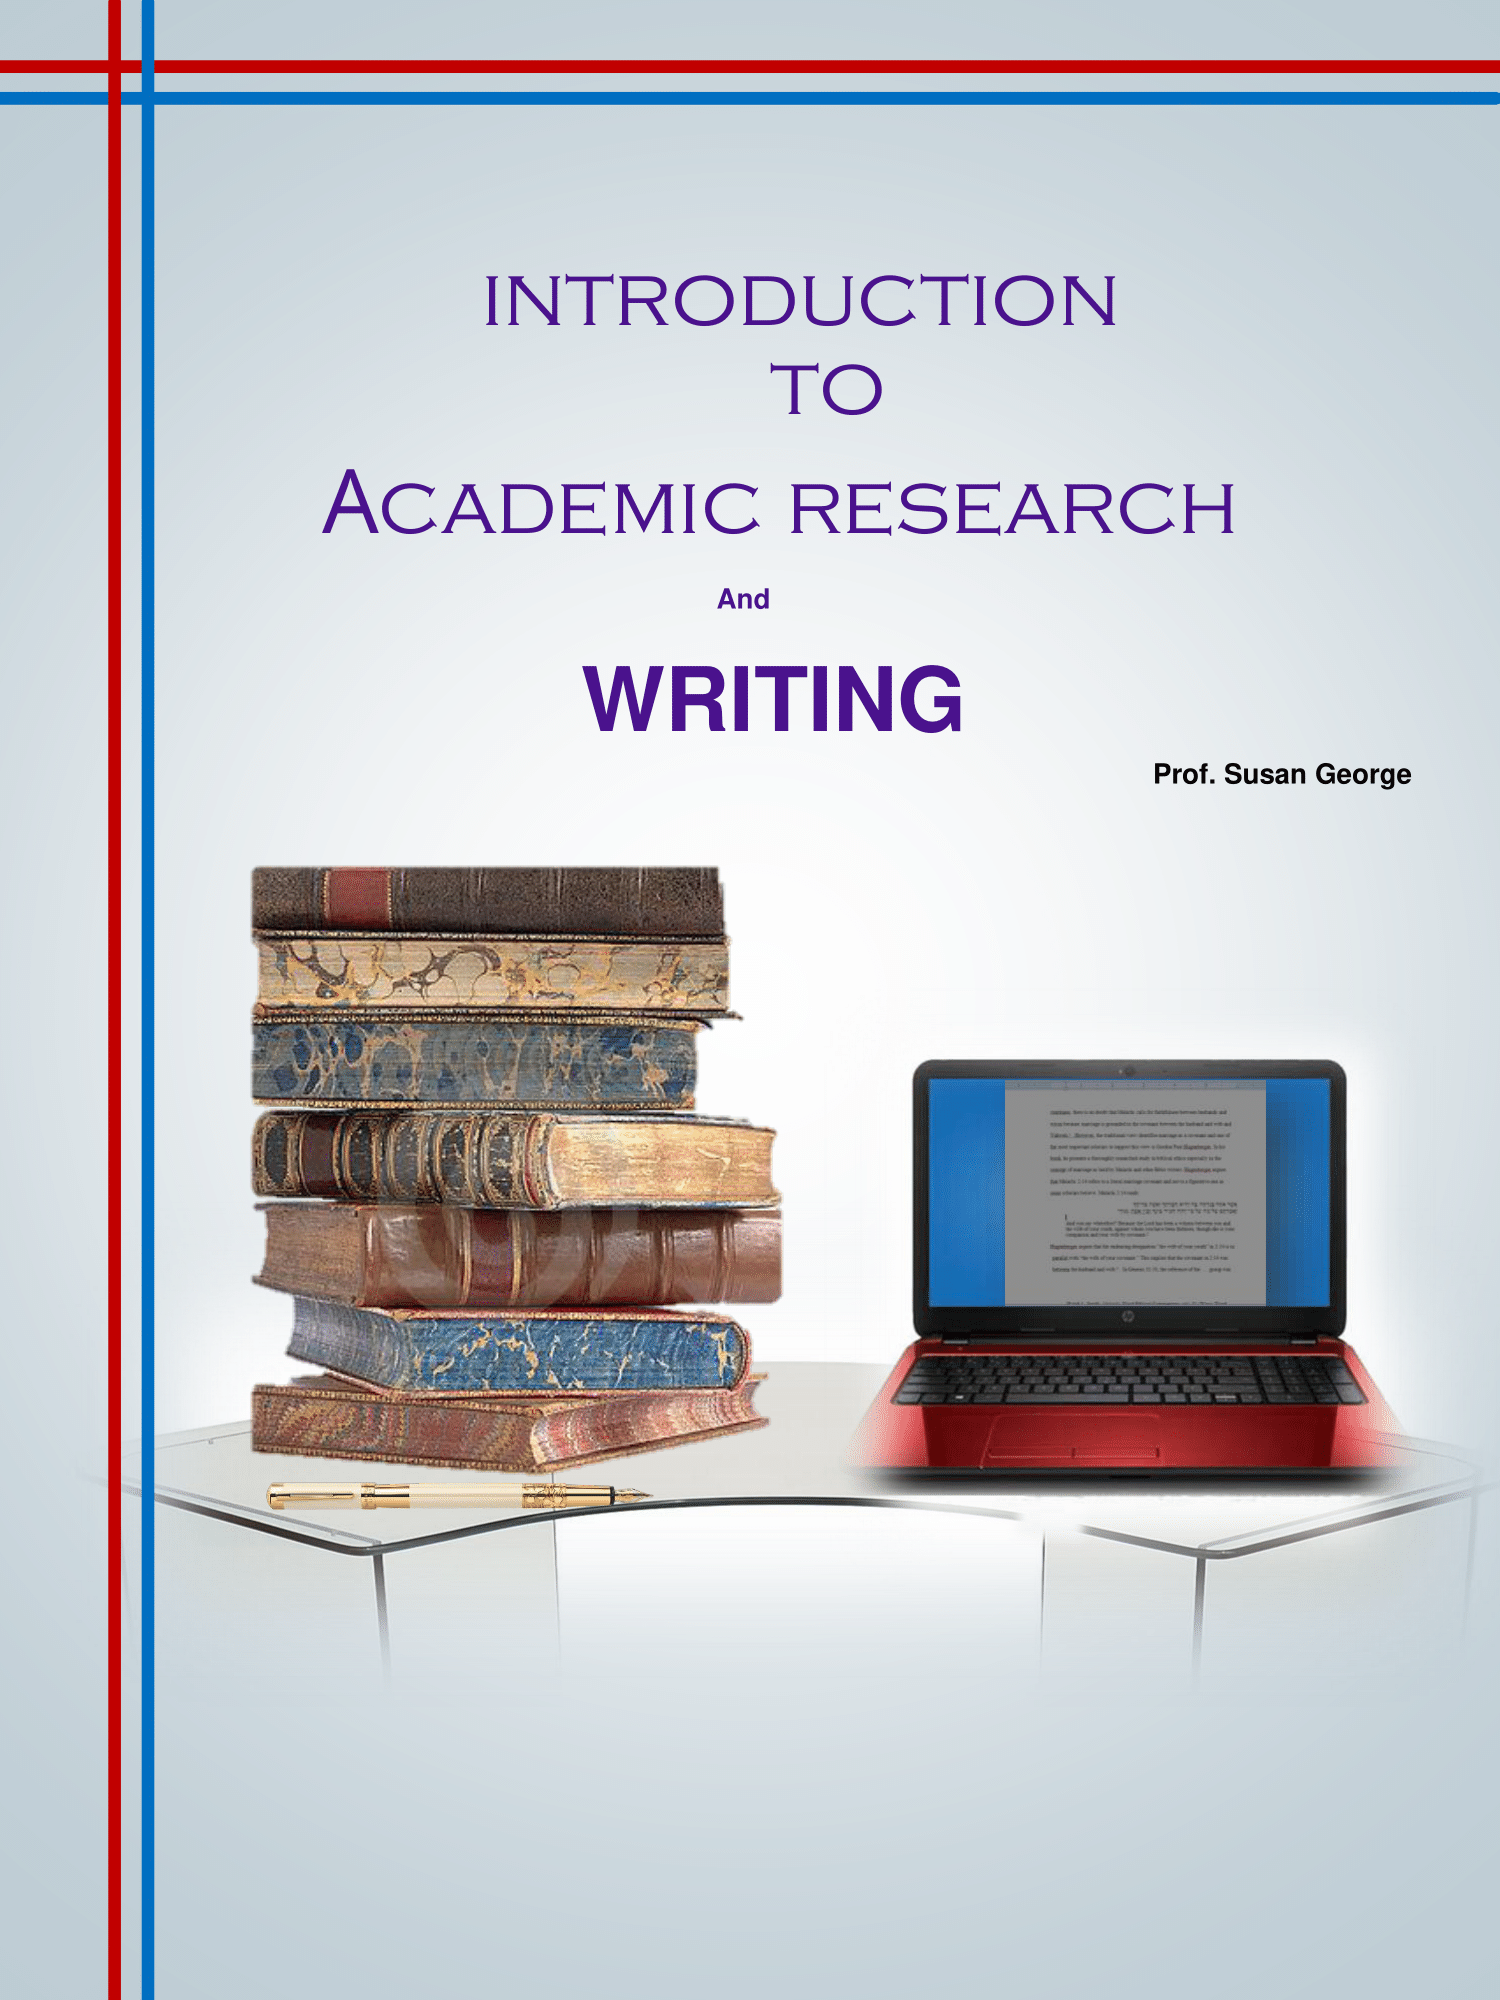 Introduction to Academic, Research and Writing